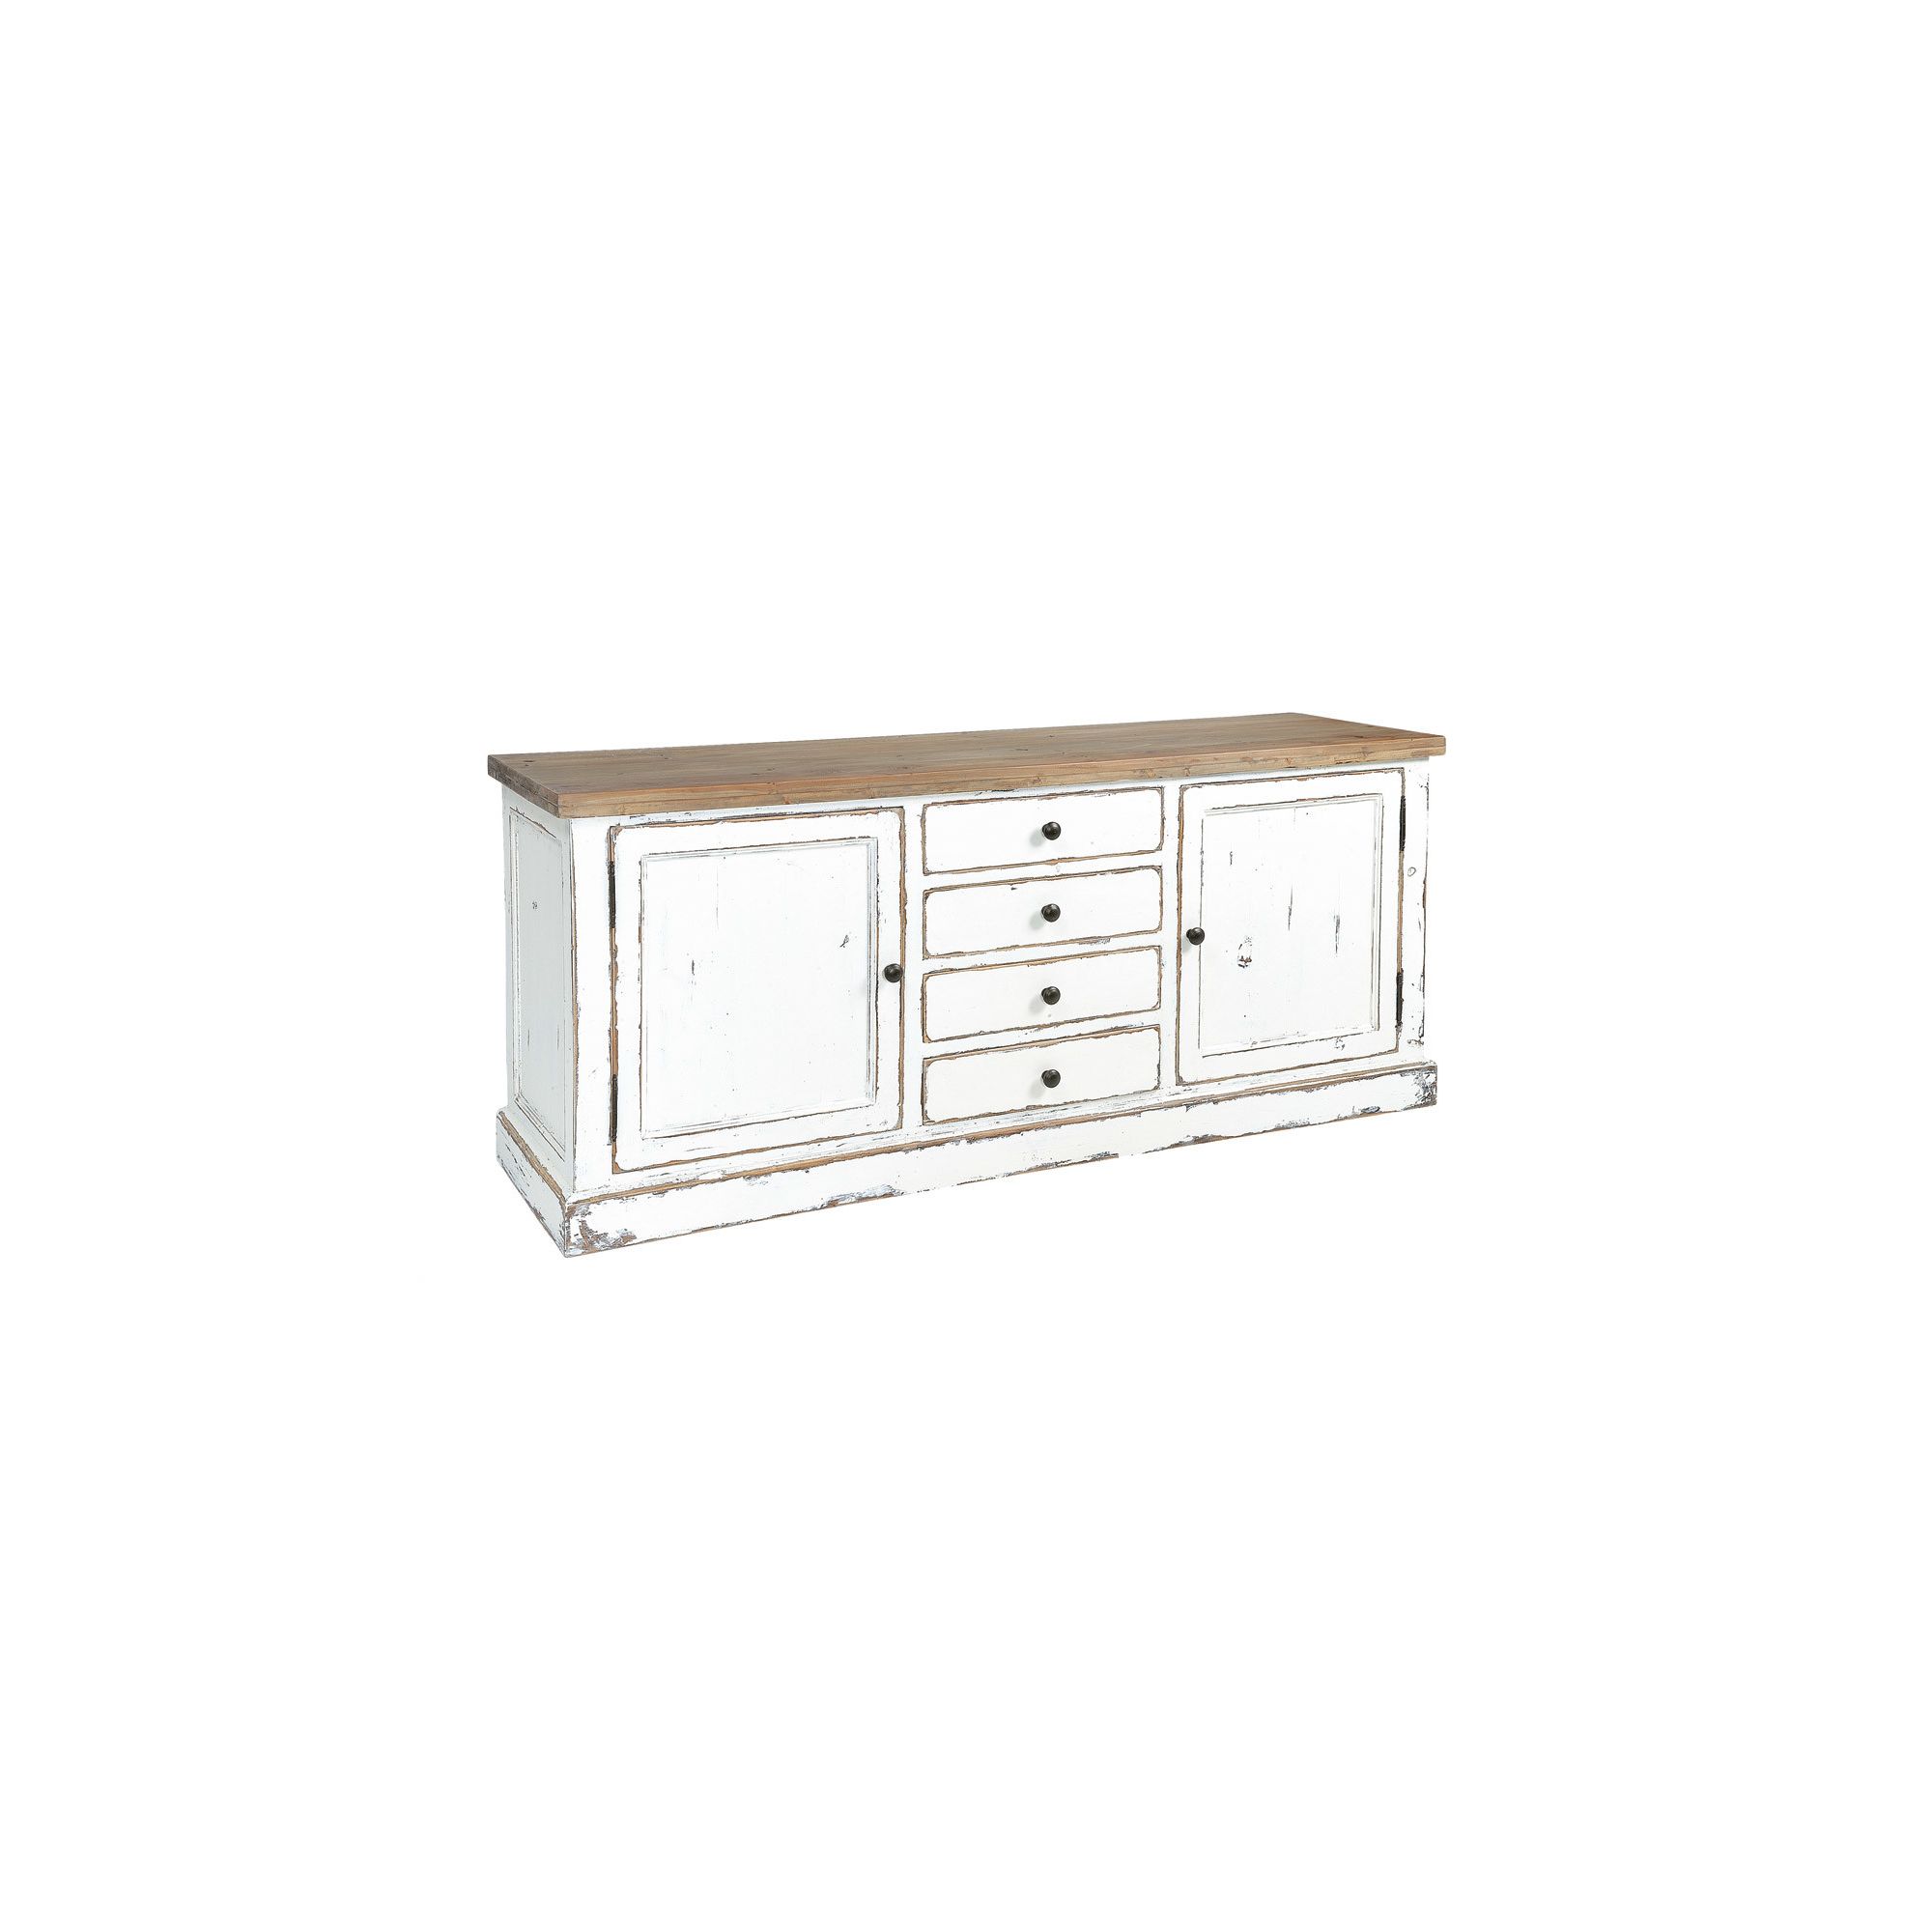 Rowico Aspen Sideboard - White Distress Painted at Tesco Direct